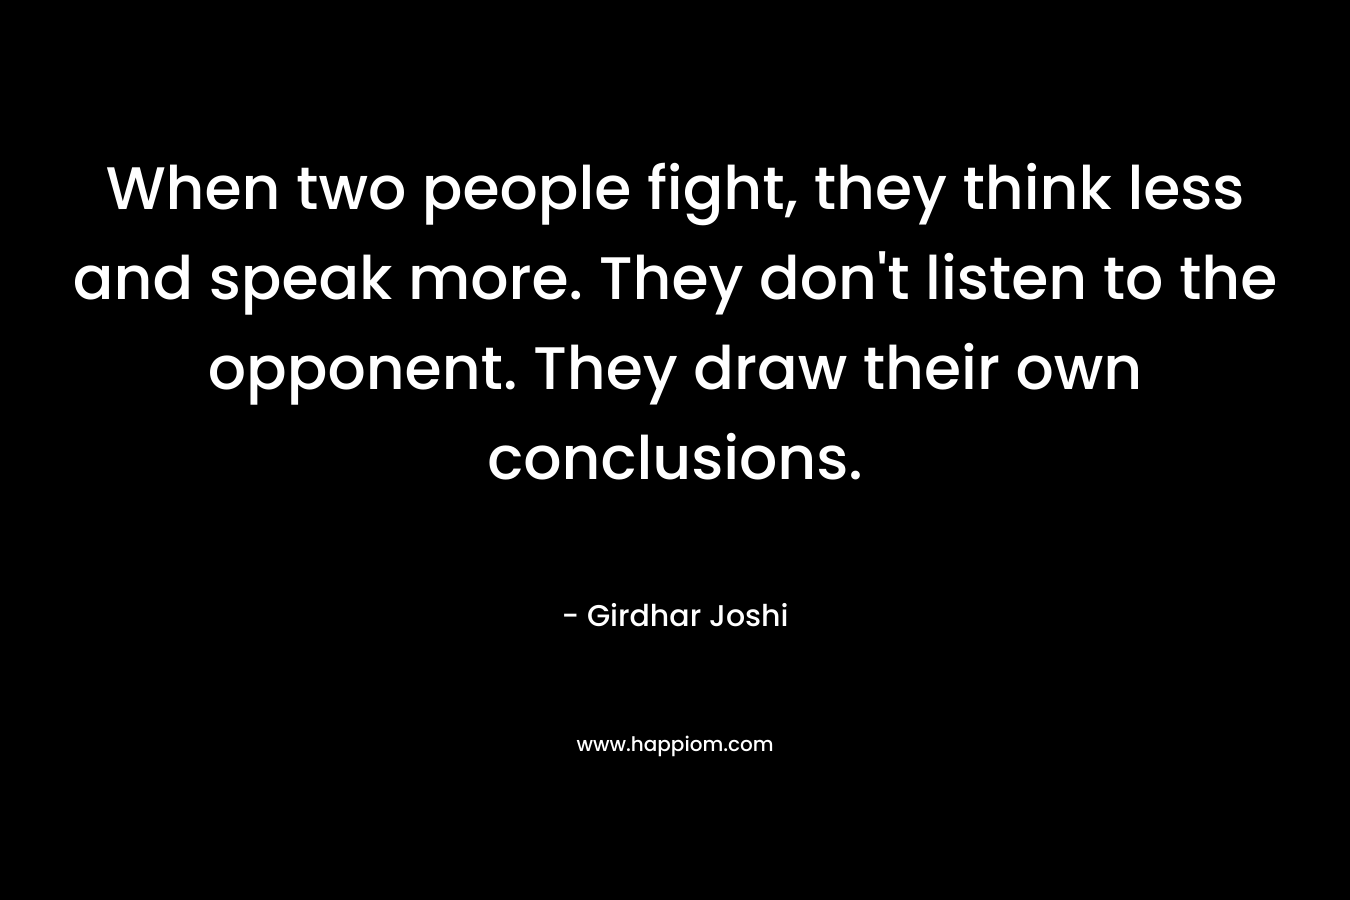 When two people fight, they think less and speak more. They don’t listen to the opponent. They draw their own conclusions. – Girdhar Joshi